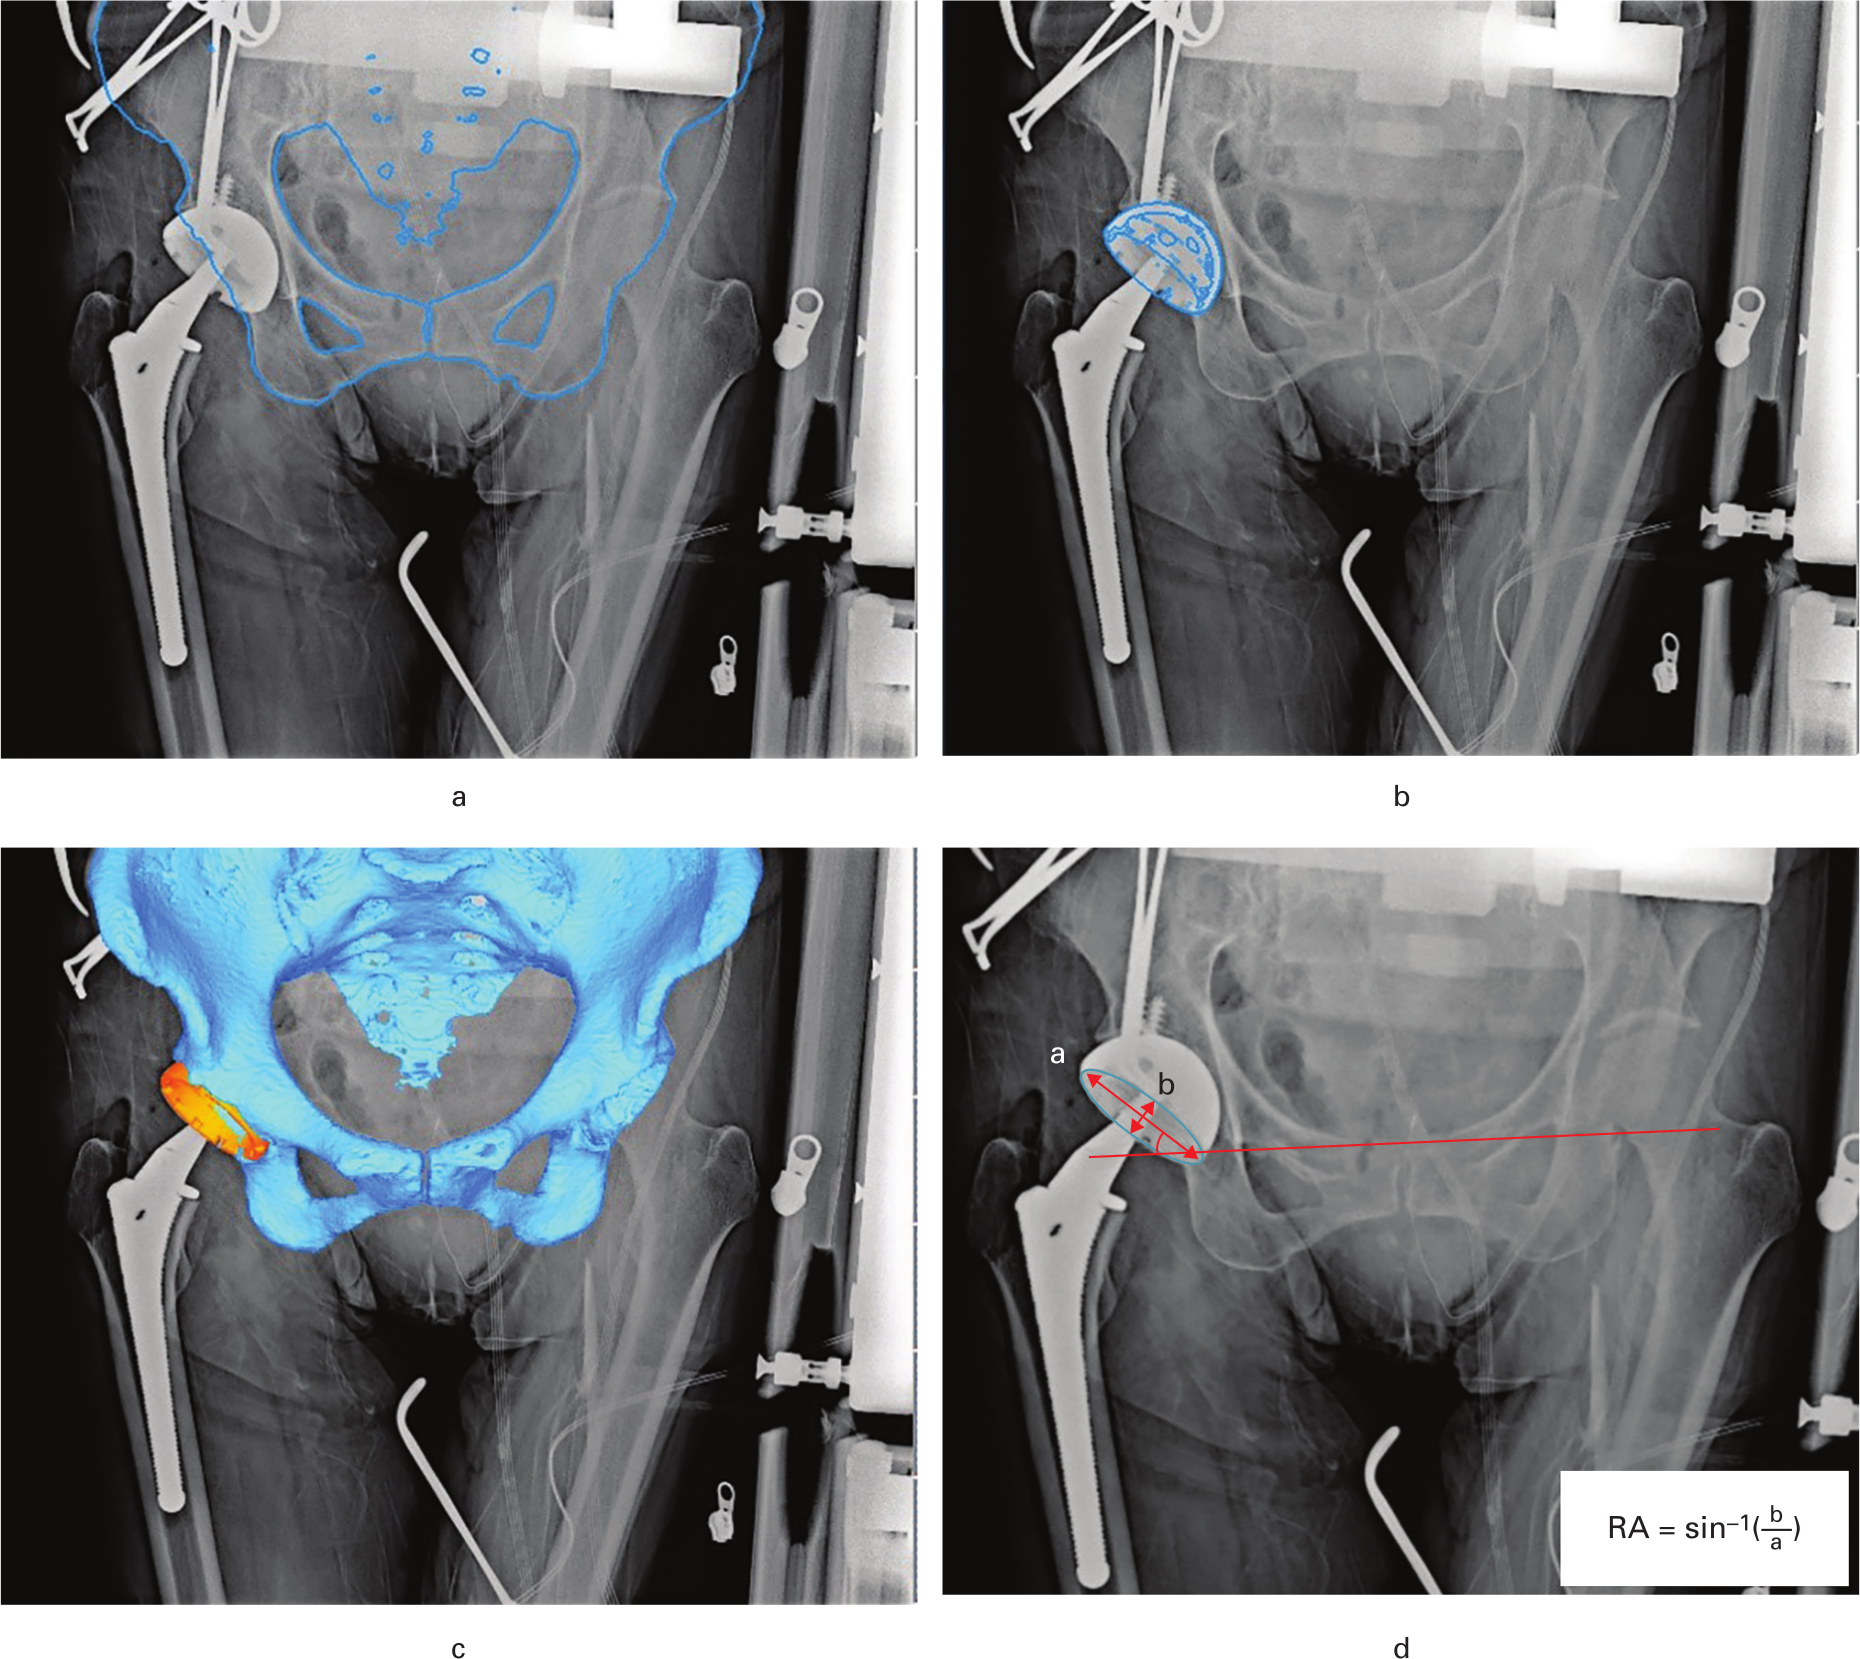 Fig. 2 
            a) The edge of the 3D pelvic bone model is image-matched to the perioperative pelvic radiograph using the image-matching software (JointTrack; University of Florida, Gainesville, Florida, USA). b) The edge of the 3D acetabular component is image-matched. c) 3D view of the pelvic bone model and the acetabular component. d) The radiological anteversion angle (RA) was calculated with the formula reported by Lewinnek et al,8 and the radiological inclination angle (RI) was measured as the angle between the line connecting both tear drops (solid line) and the long axis of the acetabular component (red arrow indicating “a”).
          